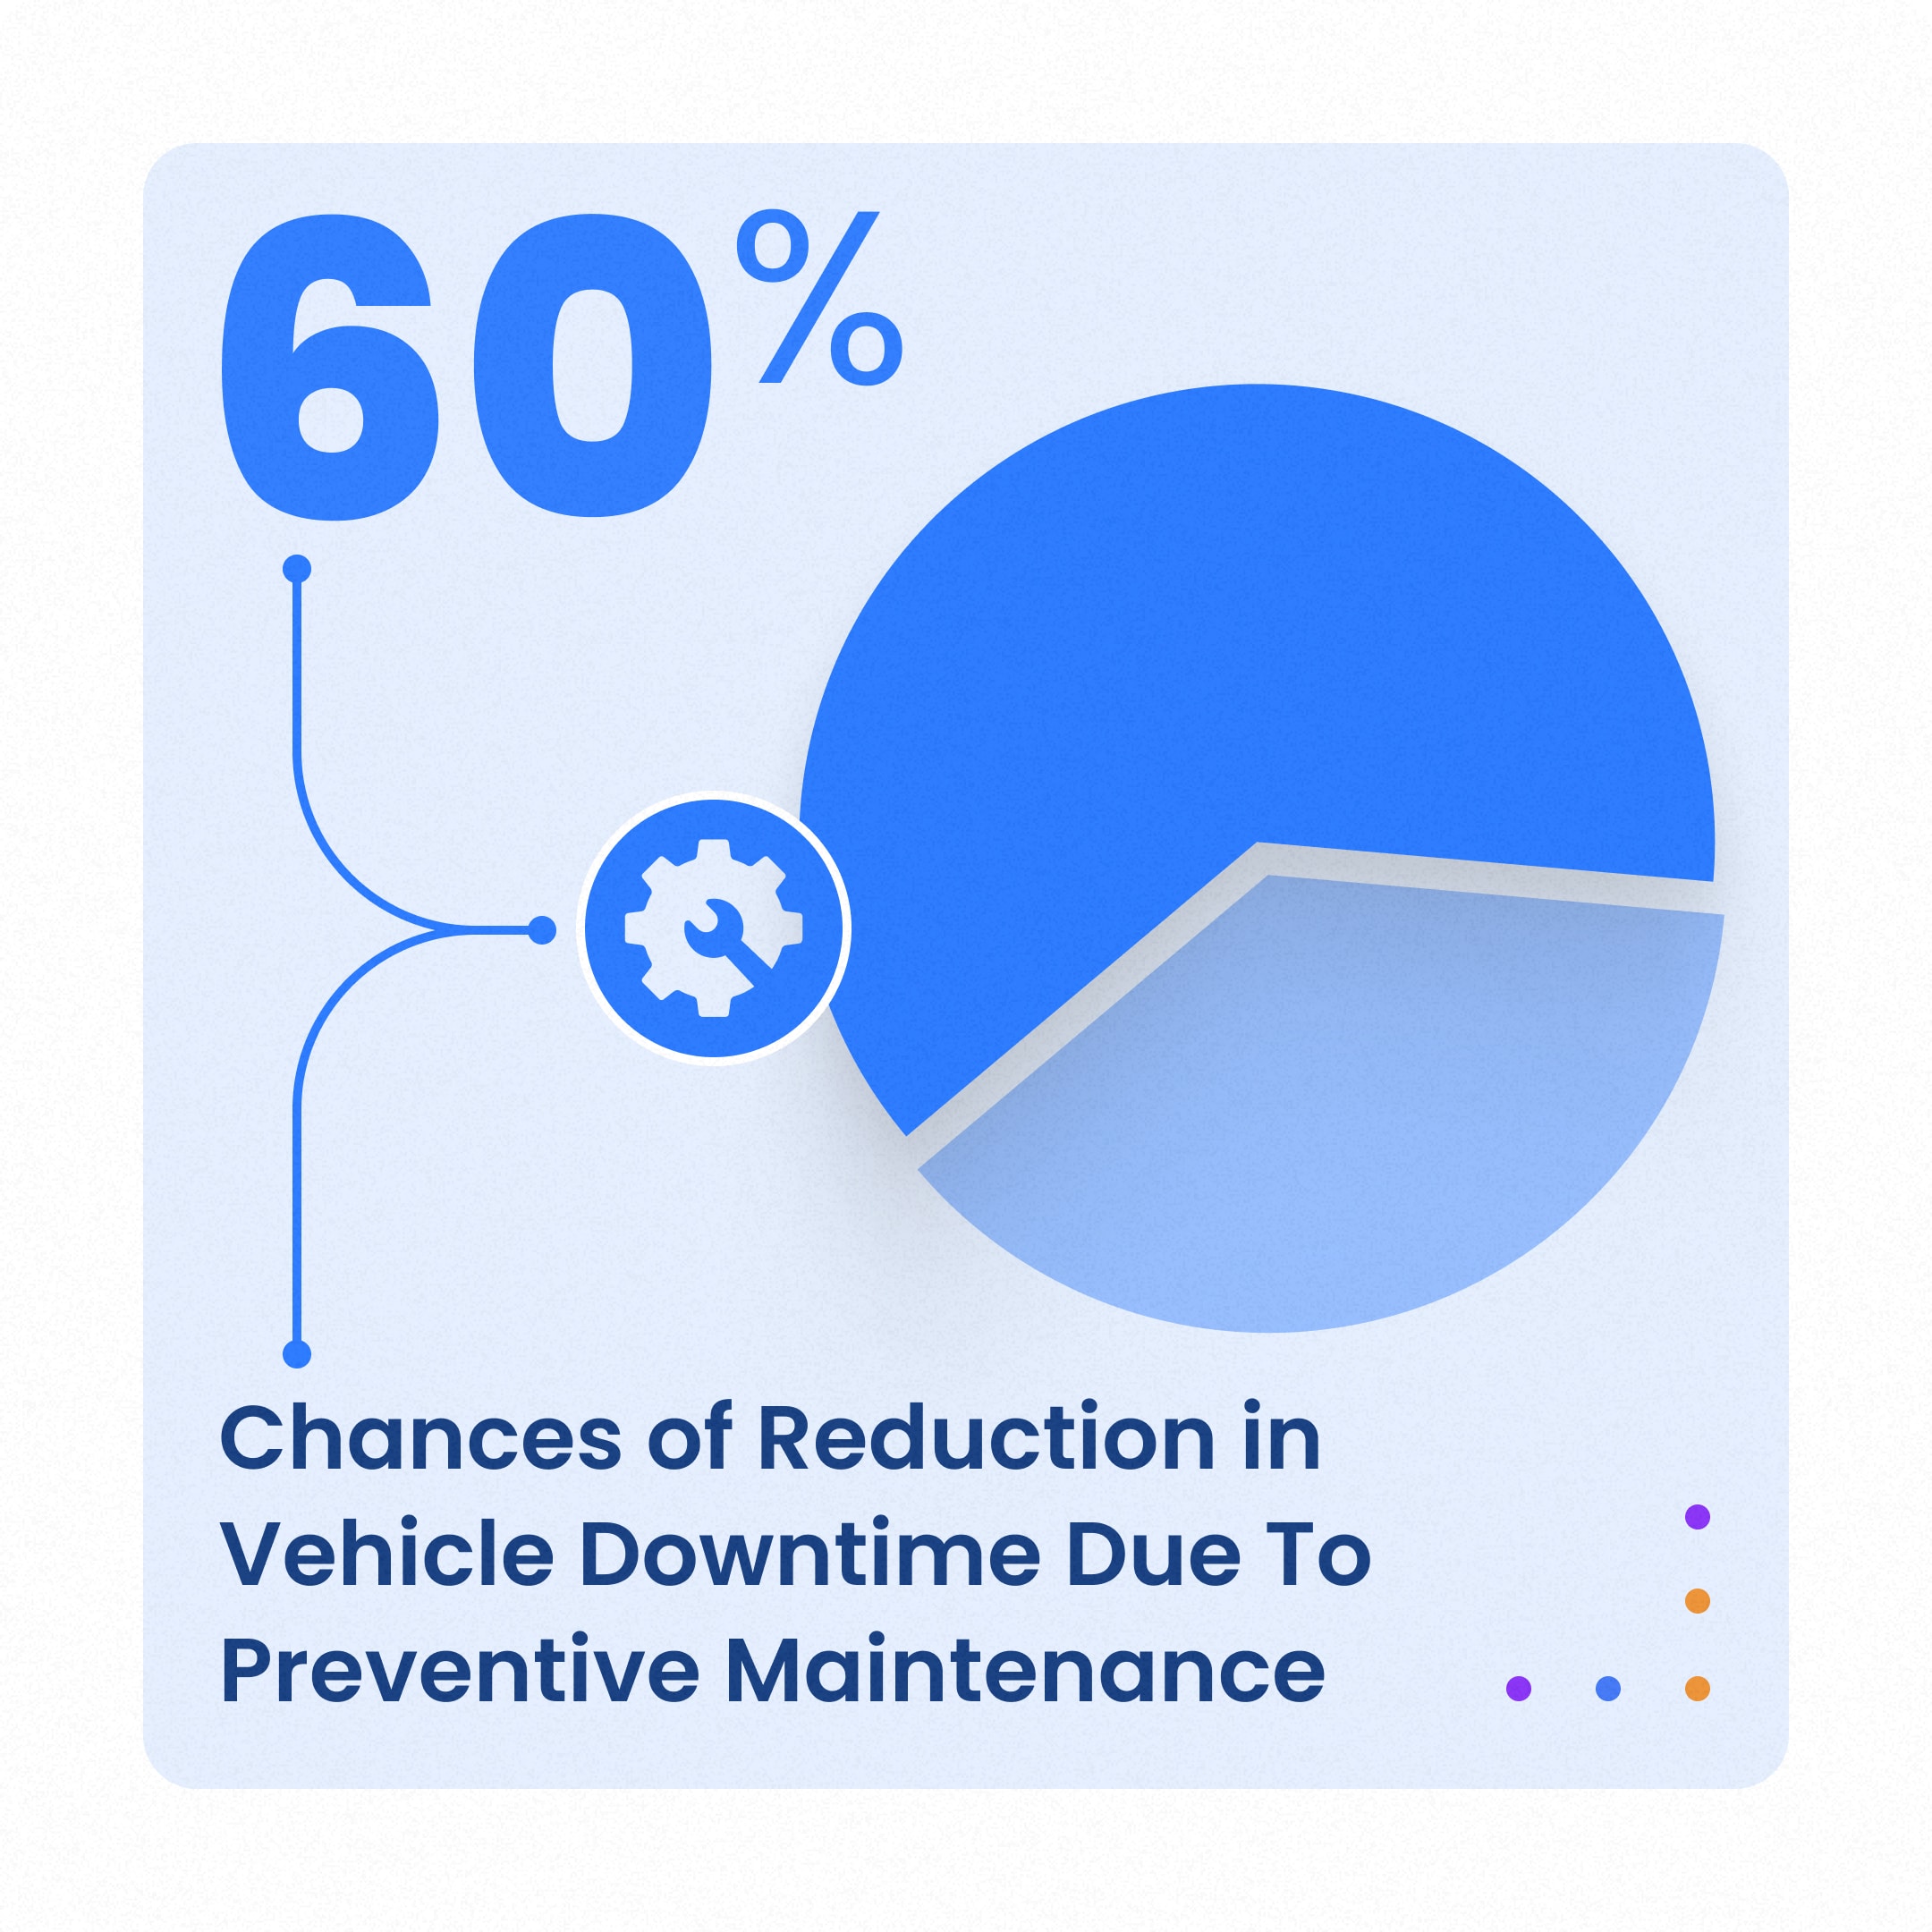 A well-scheduled and executed preventive maintenance program reduces vehicle downtime by up to 60%.